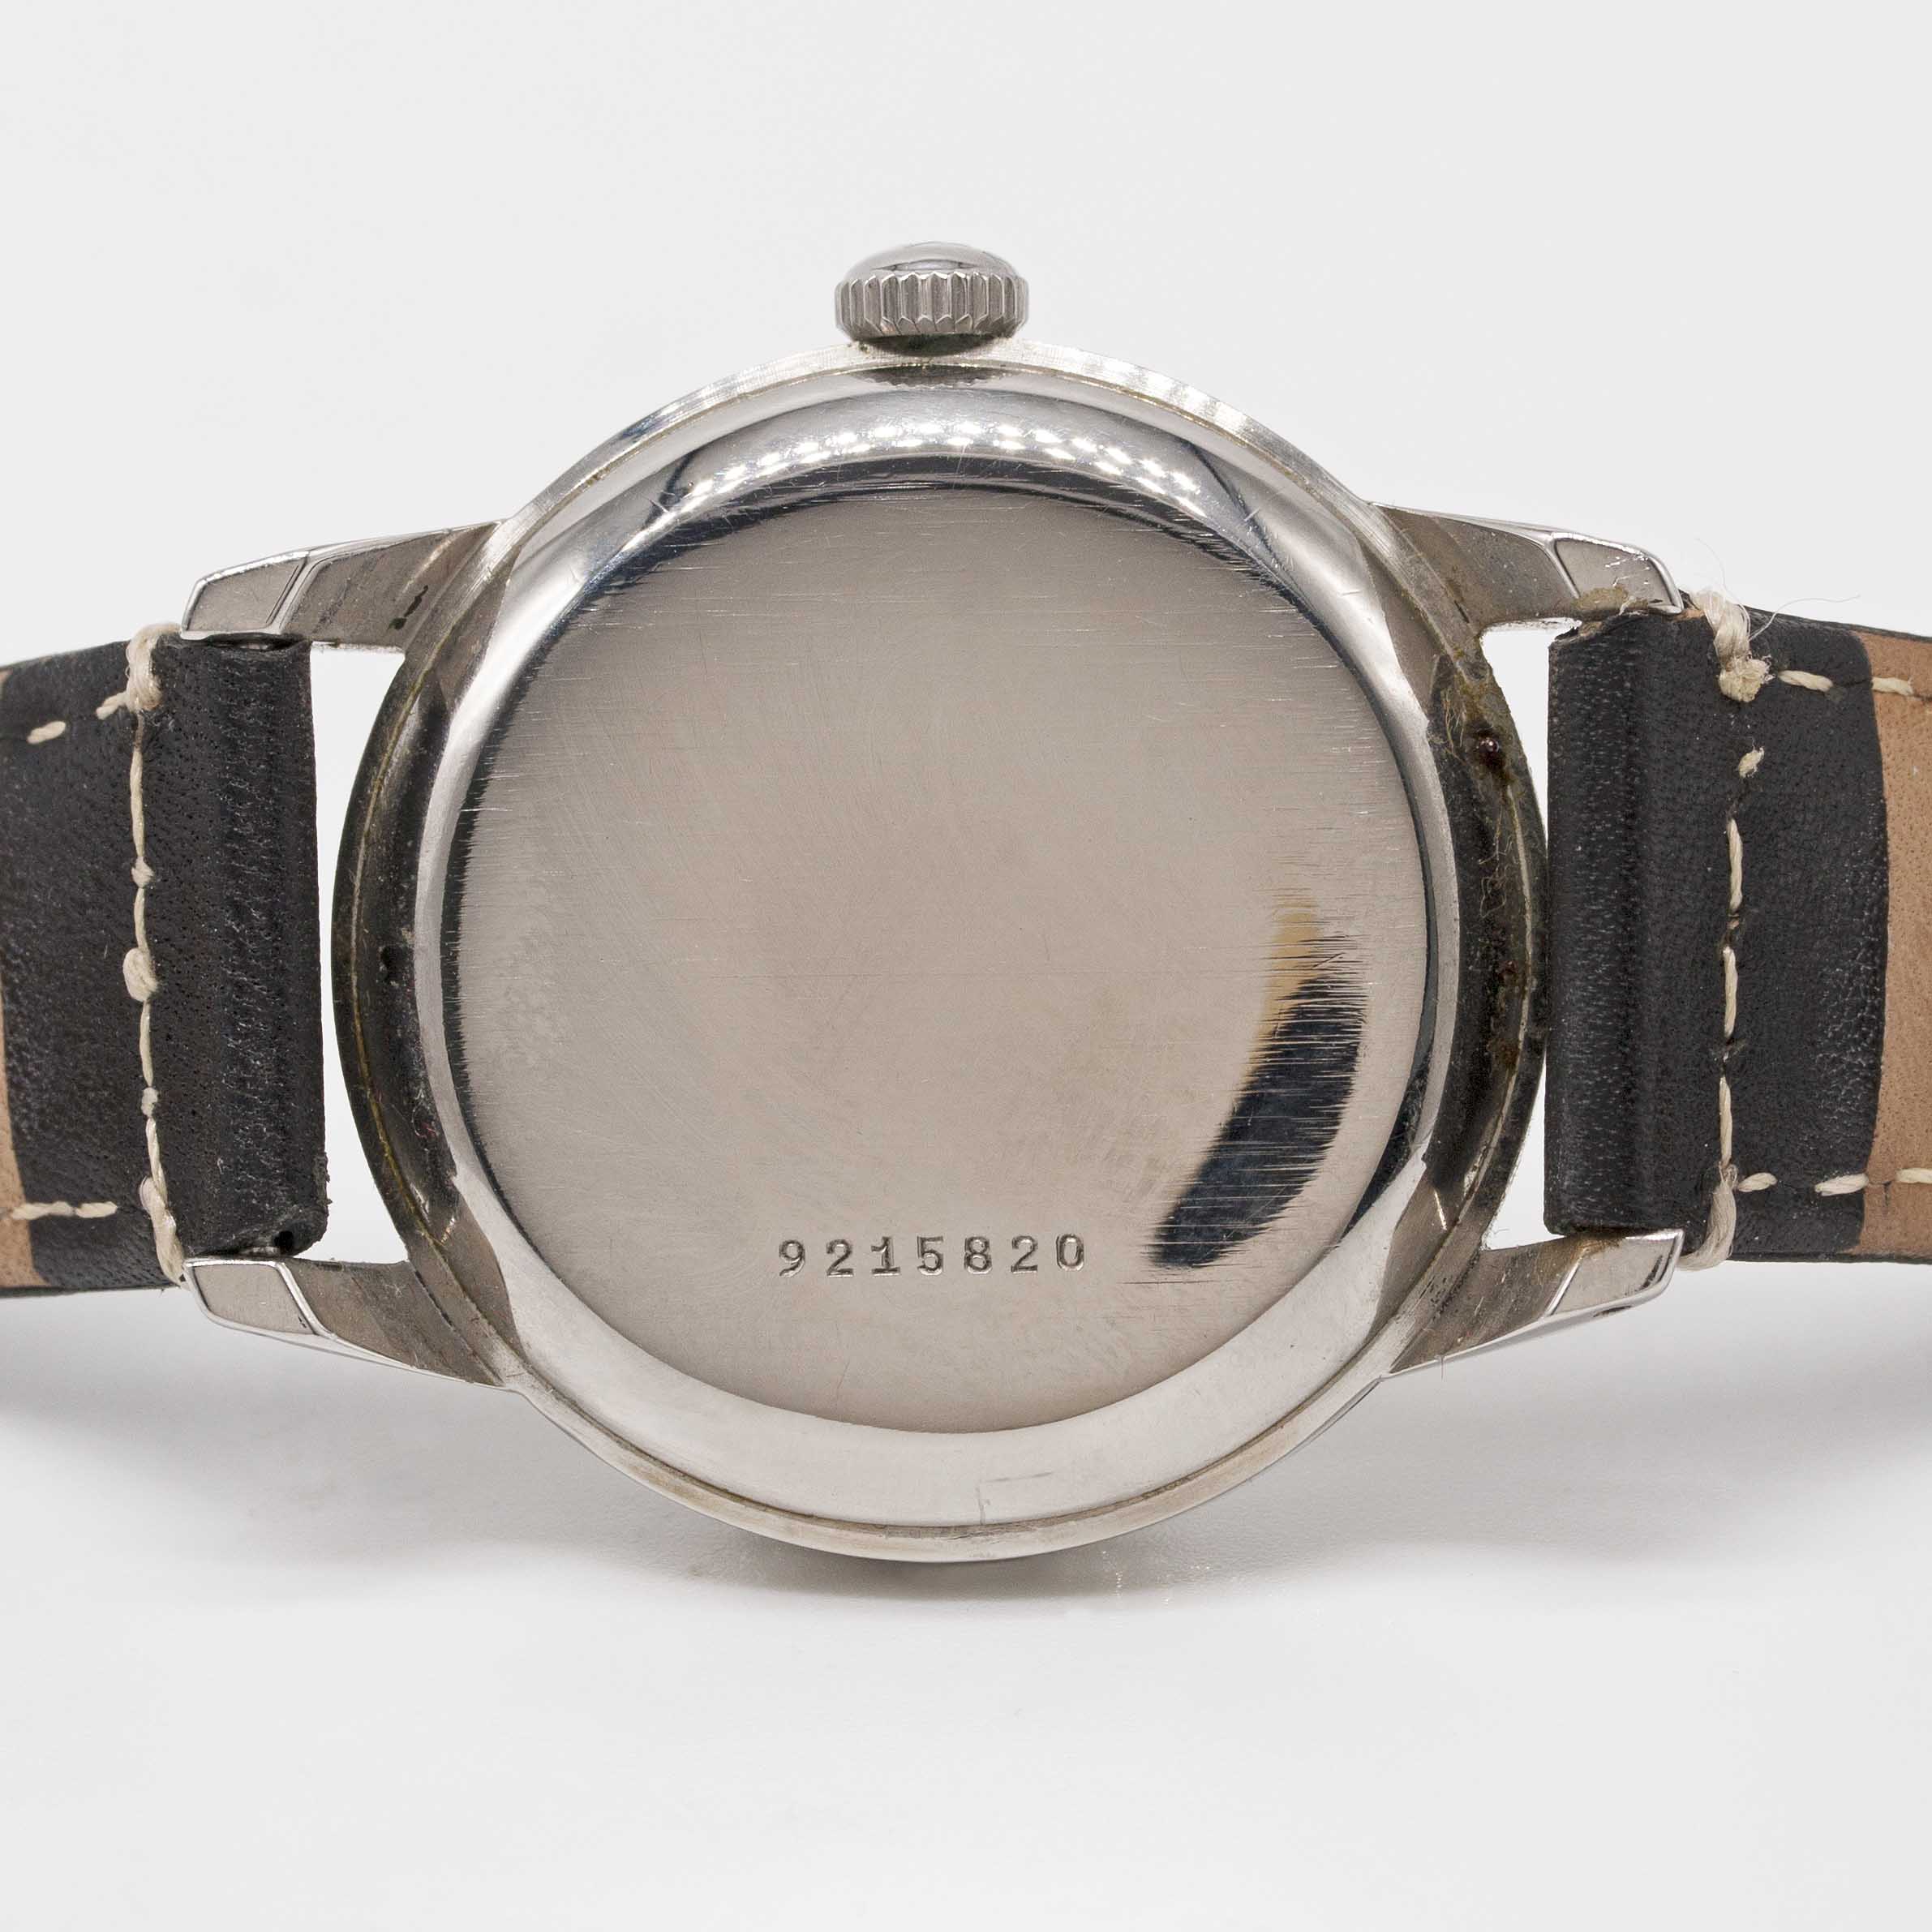 A GENTLEMAN'S STAINLESS STEEL ZENITH SPORTO WRIST WATCH CIRCA 1960, RETAILED BY TARRATT WITH CO- - Image 5 of 8